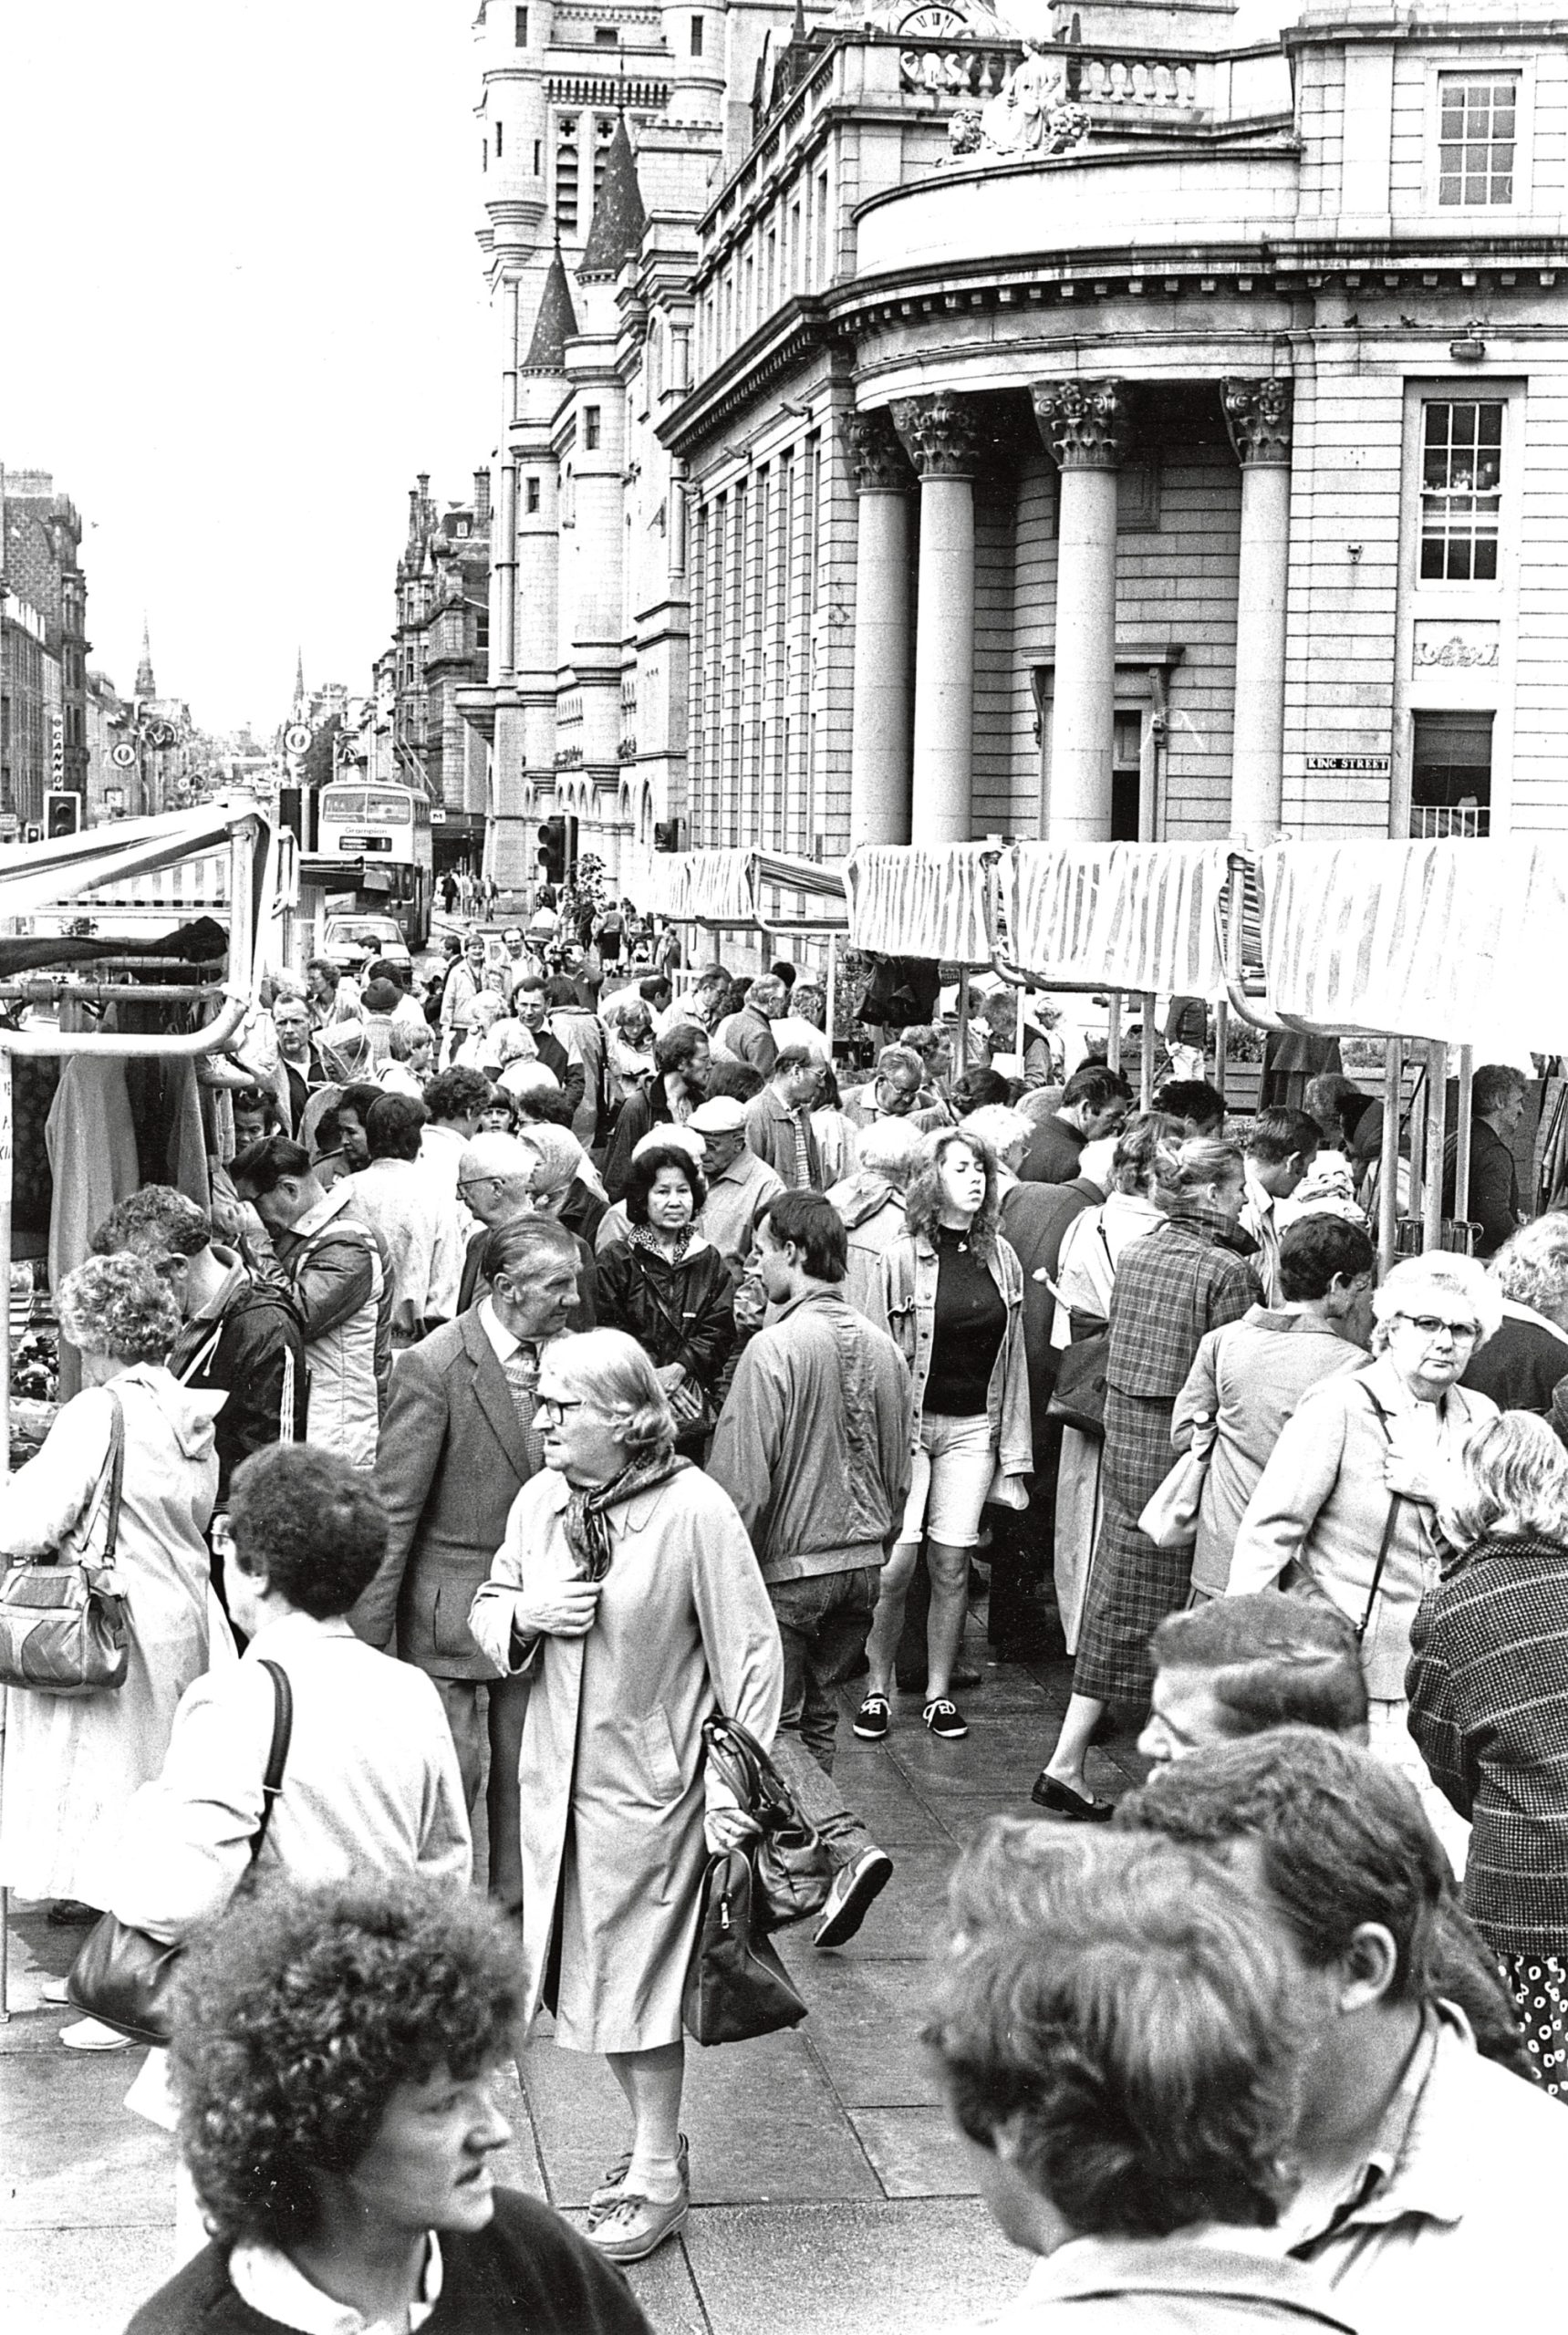 Shoppers throng the stalls at the new stance for the Friday Market in 1988.